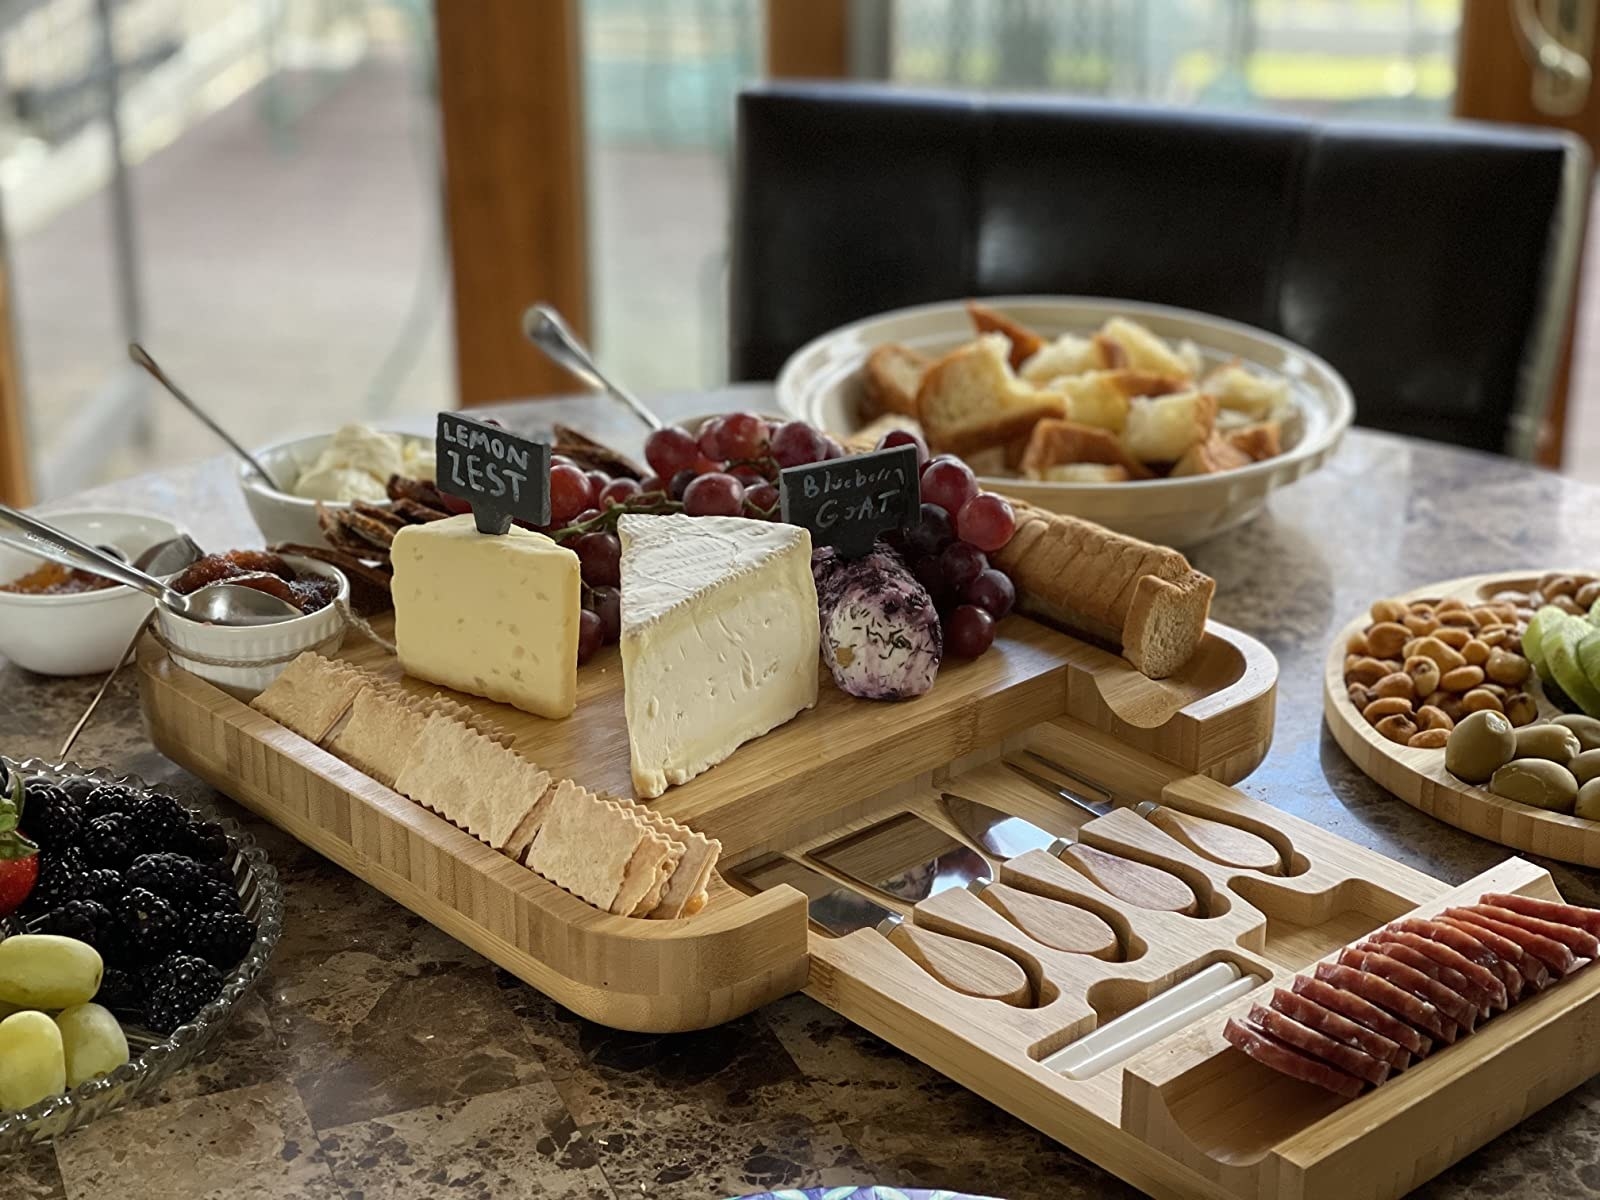 A reviewer shows the charcuterie set filled with various cheeses, fruit, crackers, and spreads.